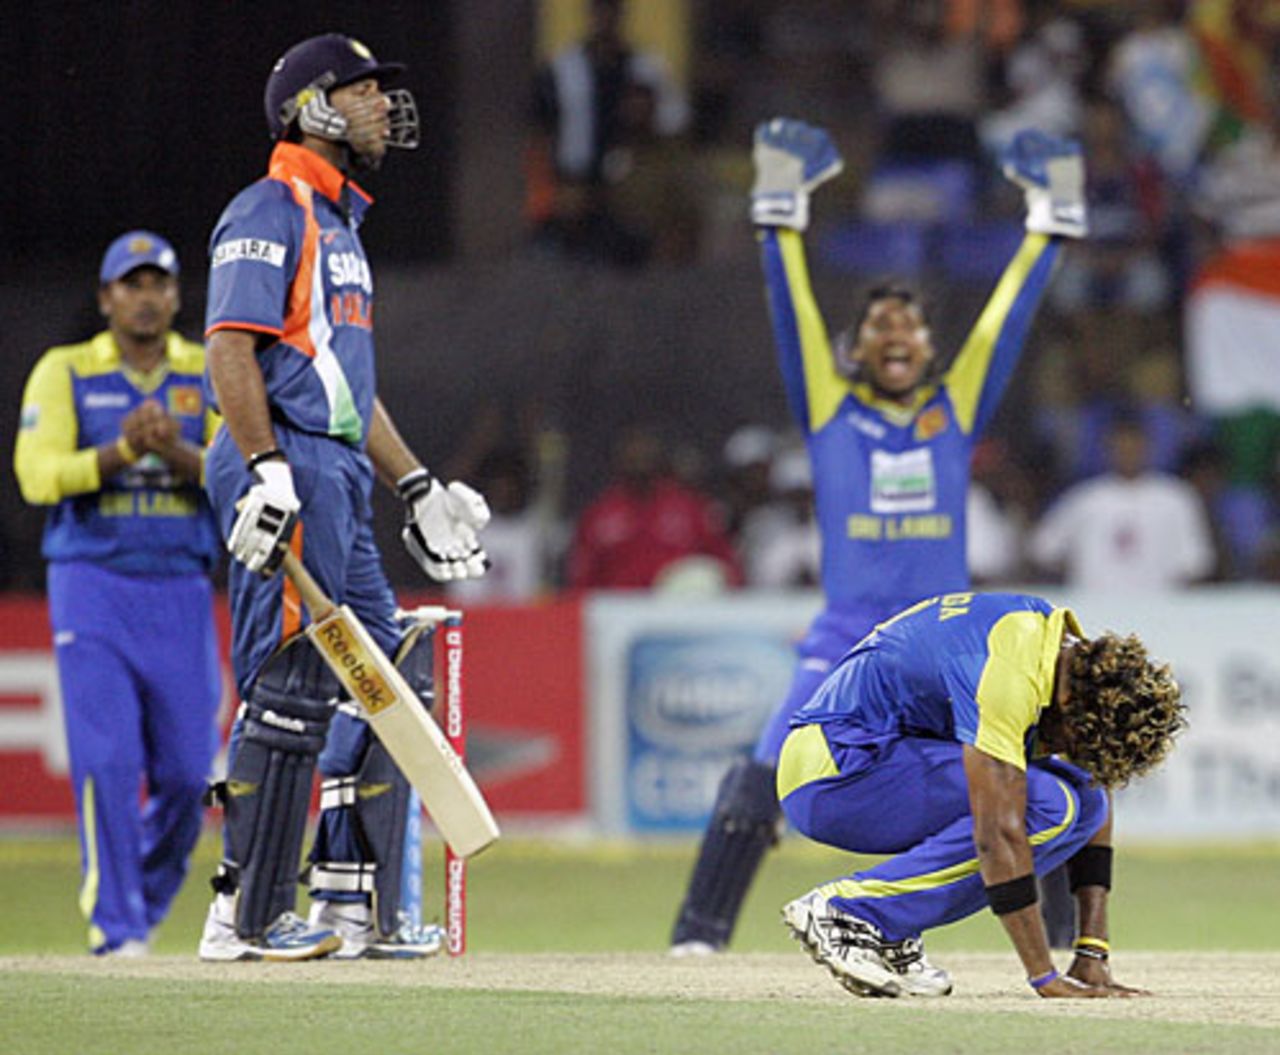 Lasith Malinga is disappointed after an appeal for Yuvraj Singh's wicket is turned down, Sri Lanka v India, Compaq Cup, 3rd match, Colombo, September 12, 2009